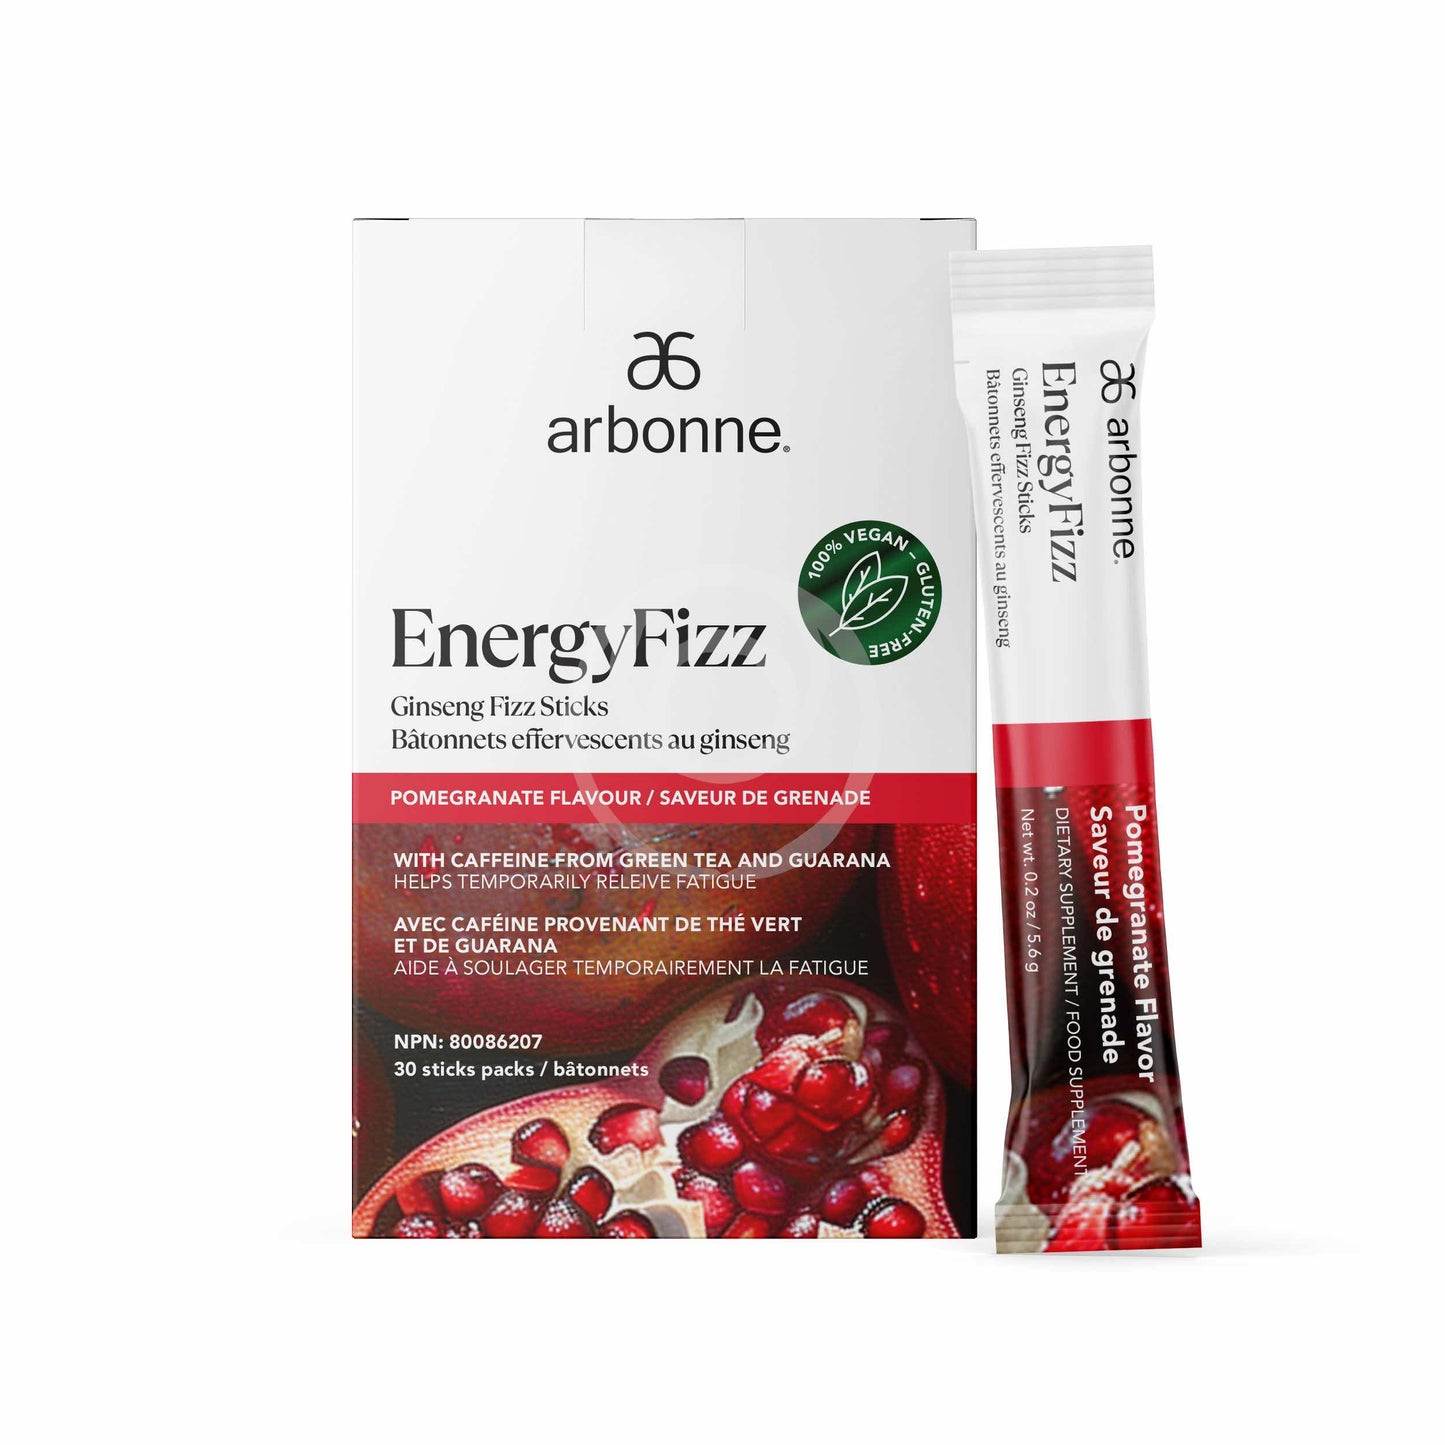 Arbonne EnergyFizz Ginseng Fizz Sticks in Pomegranate Flavor, showcasing the product's vegan credentials and caffeine from green tea and guarana.